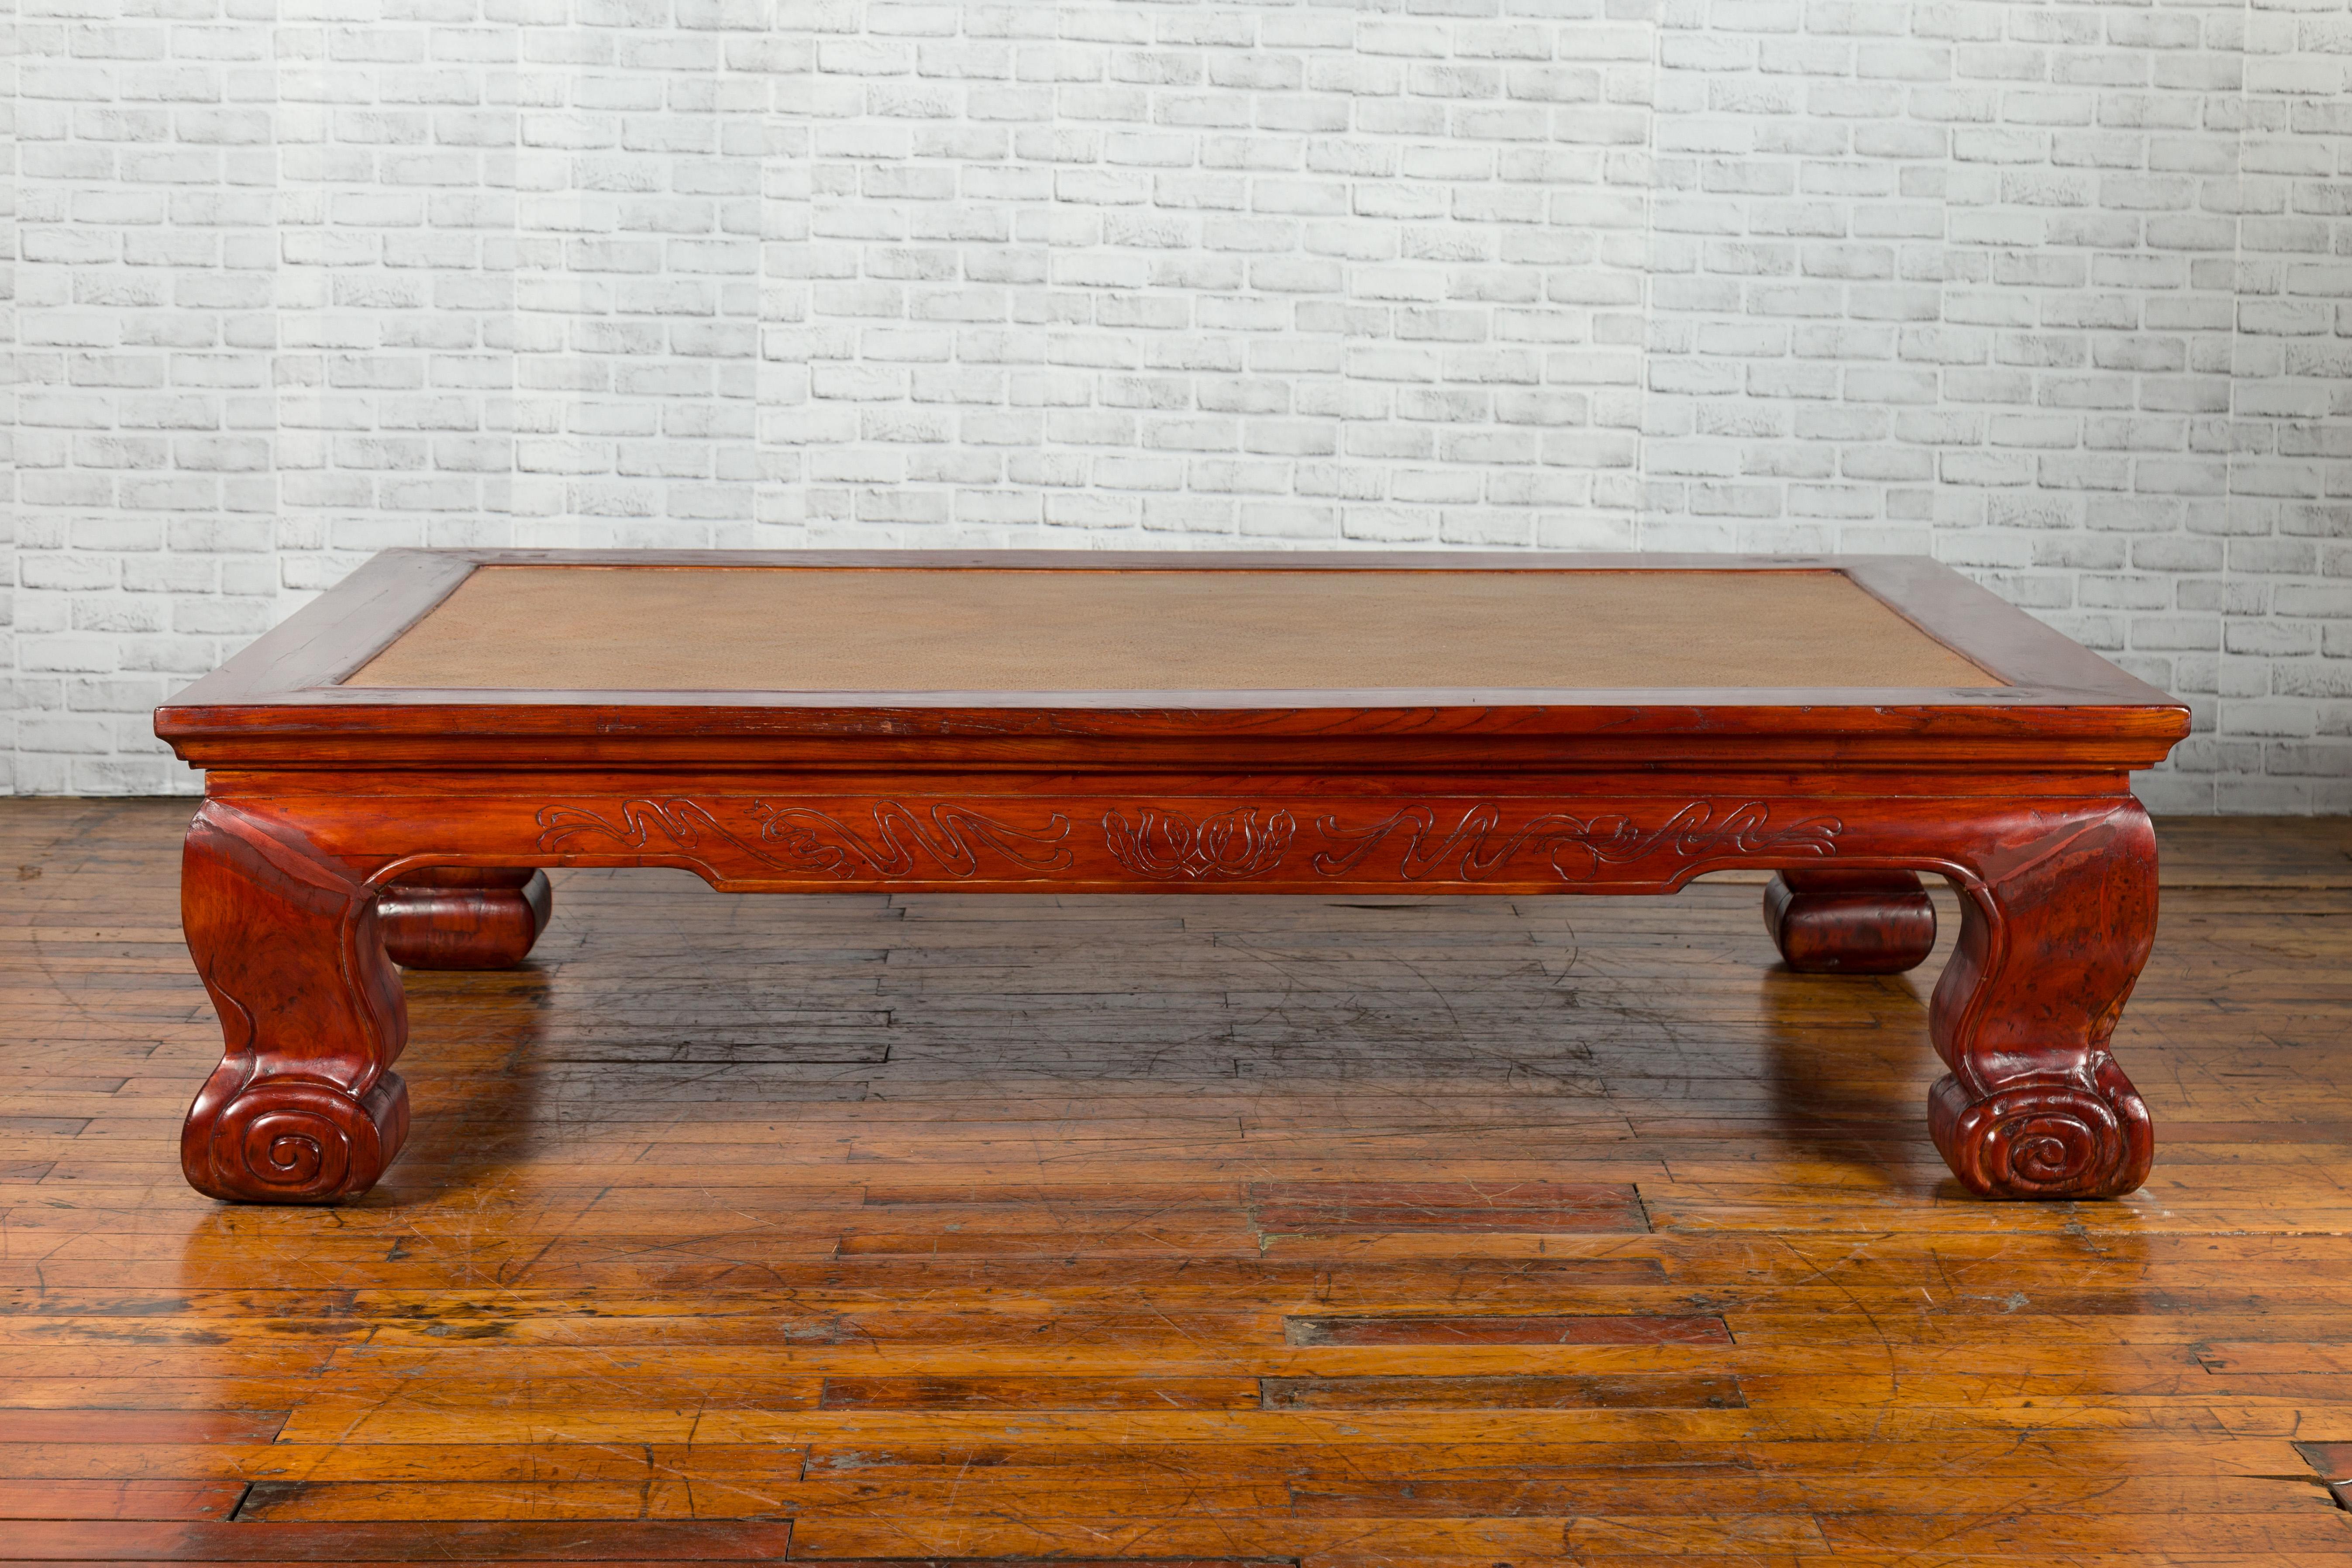 A Chinese Qing Dynasty period opium mat coffee table from the 19th century, with woven rattan top, carved motifs and scrolling legs. Created in China during the Qing Dynasty, this low opium mat coffee table features a woven rattan top secured in a